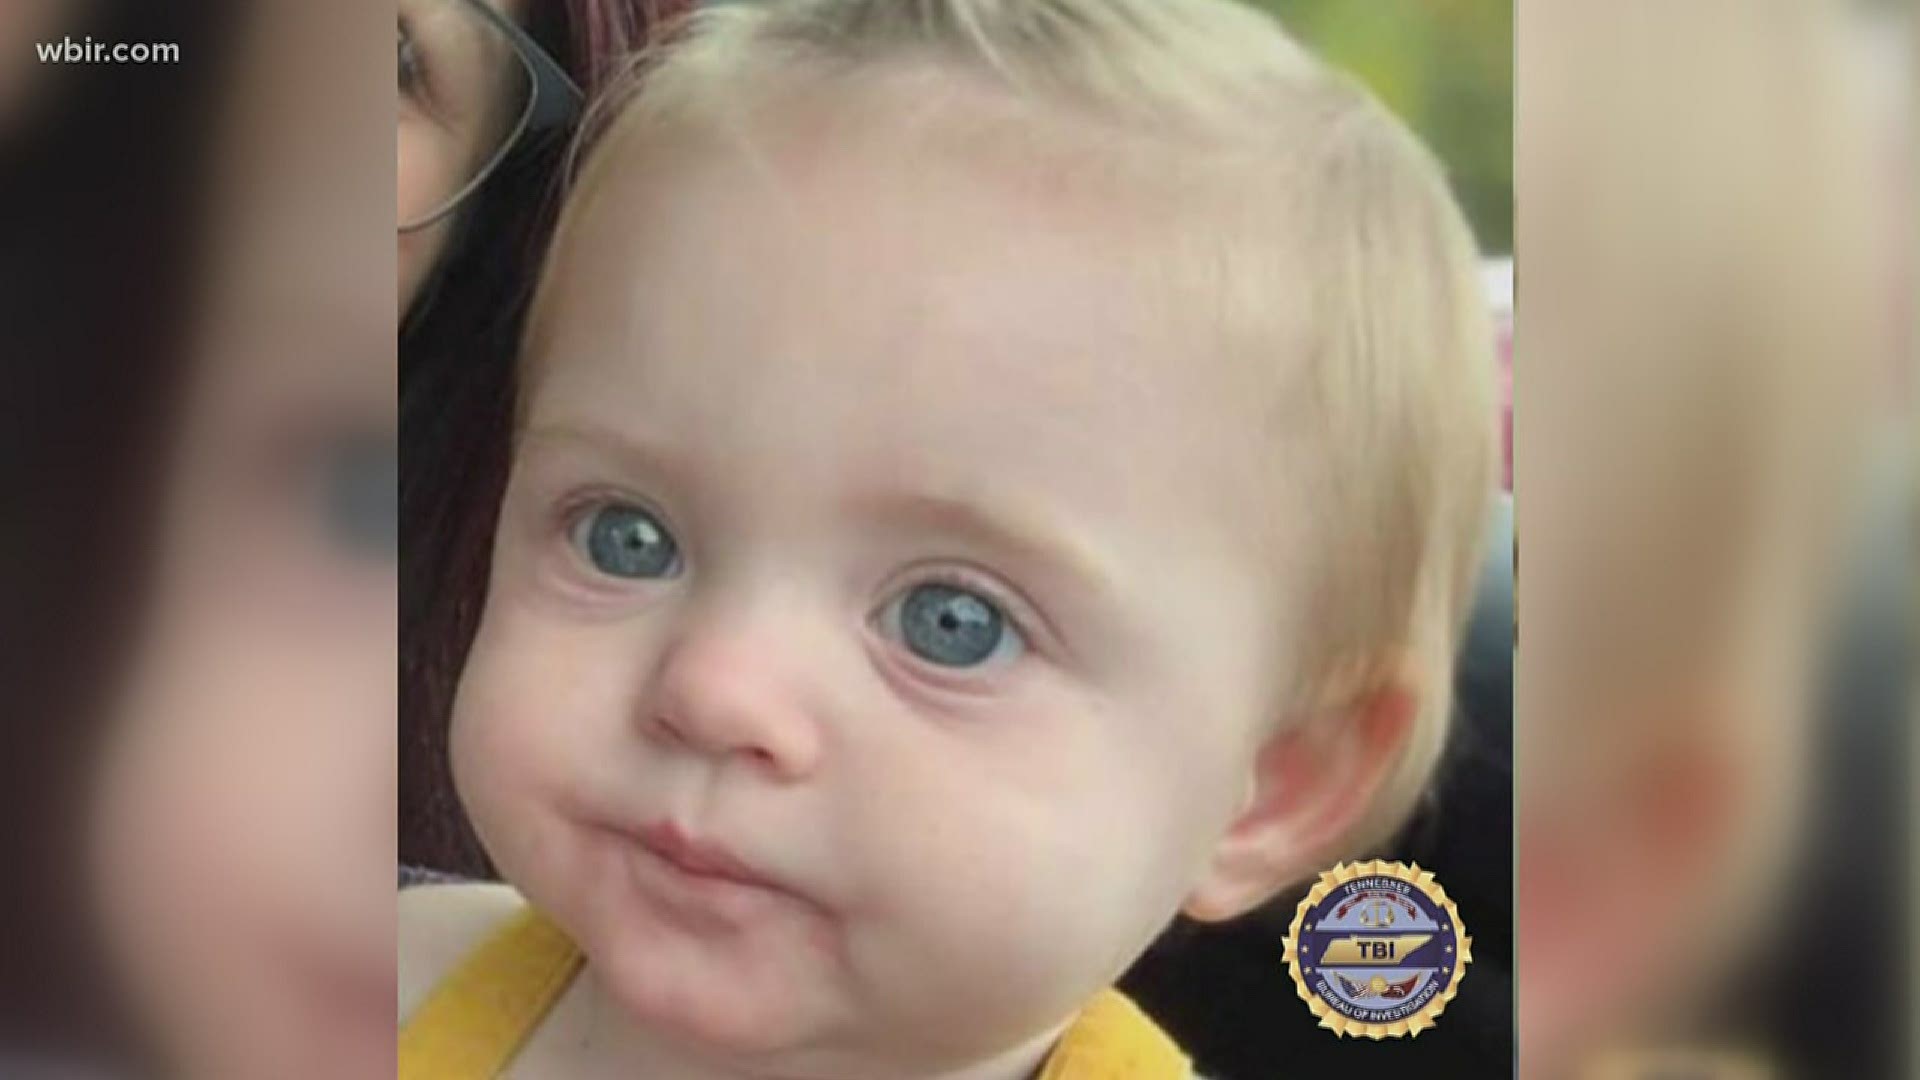 TBI agents found the remains of 15-month-old Evelyn Boswell on the property of a family member in March.